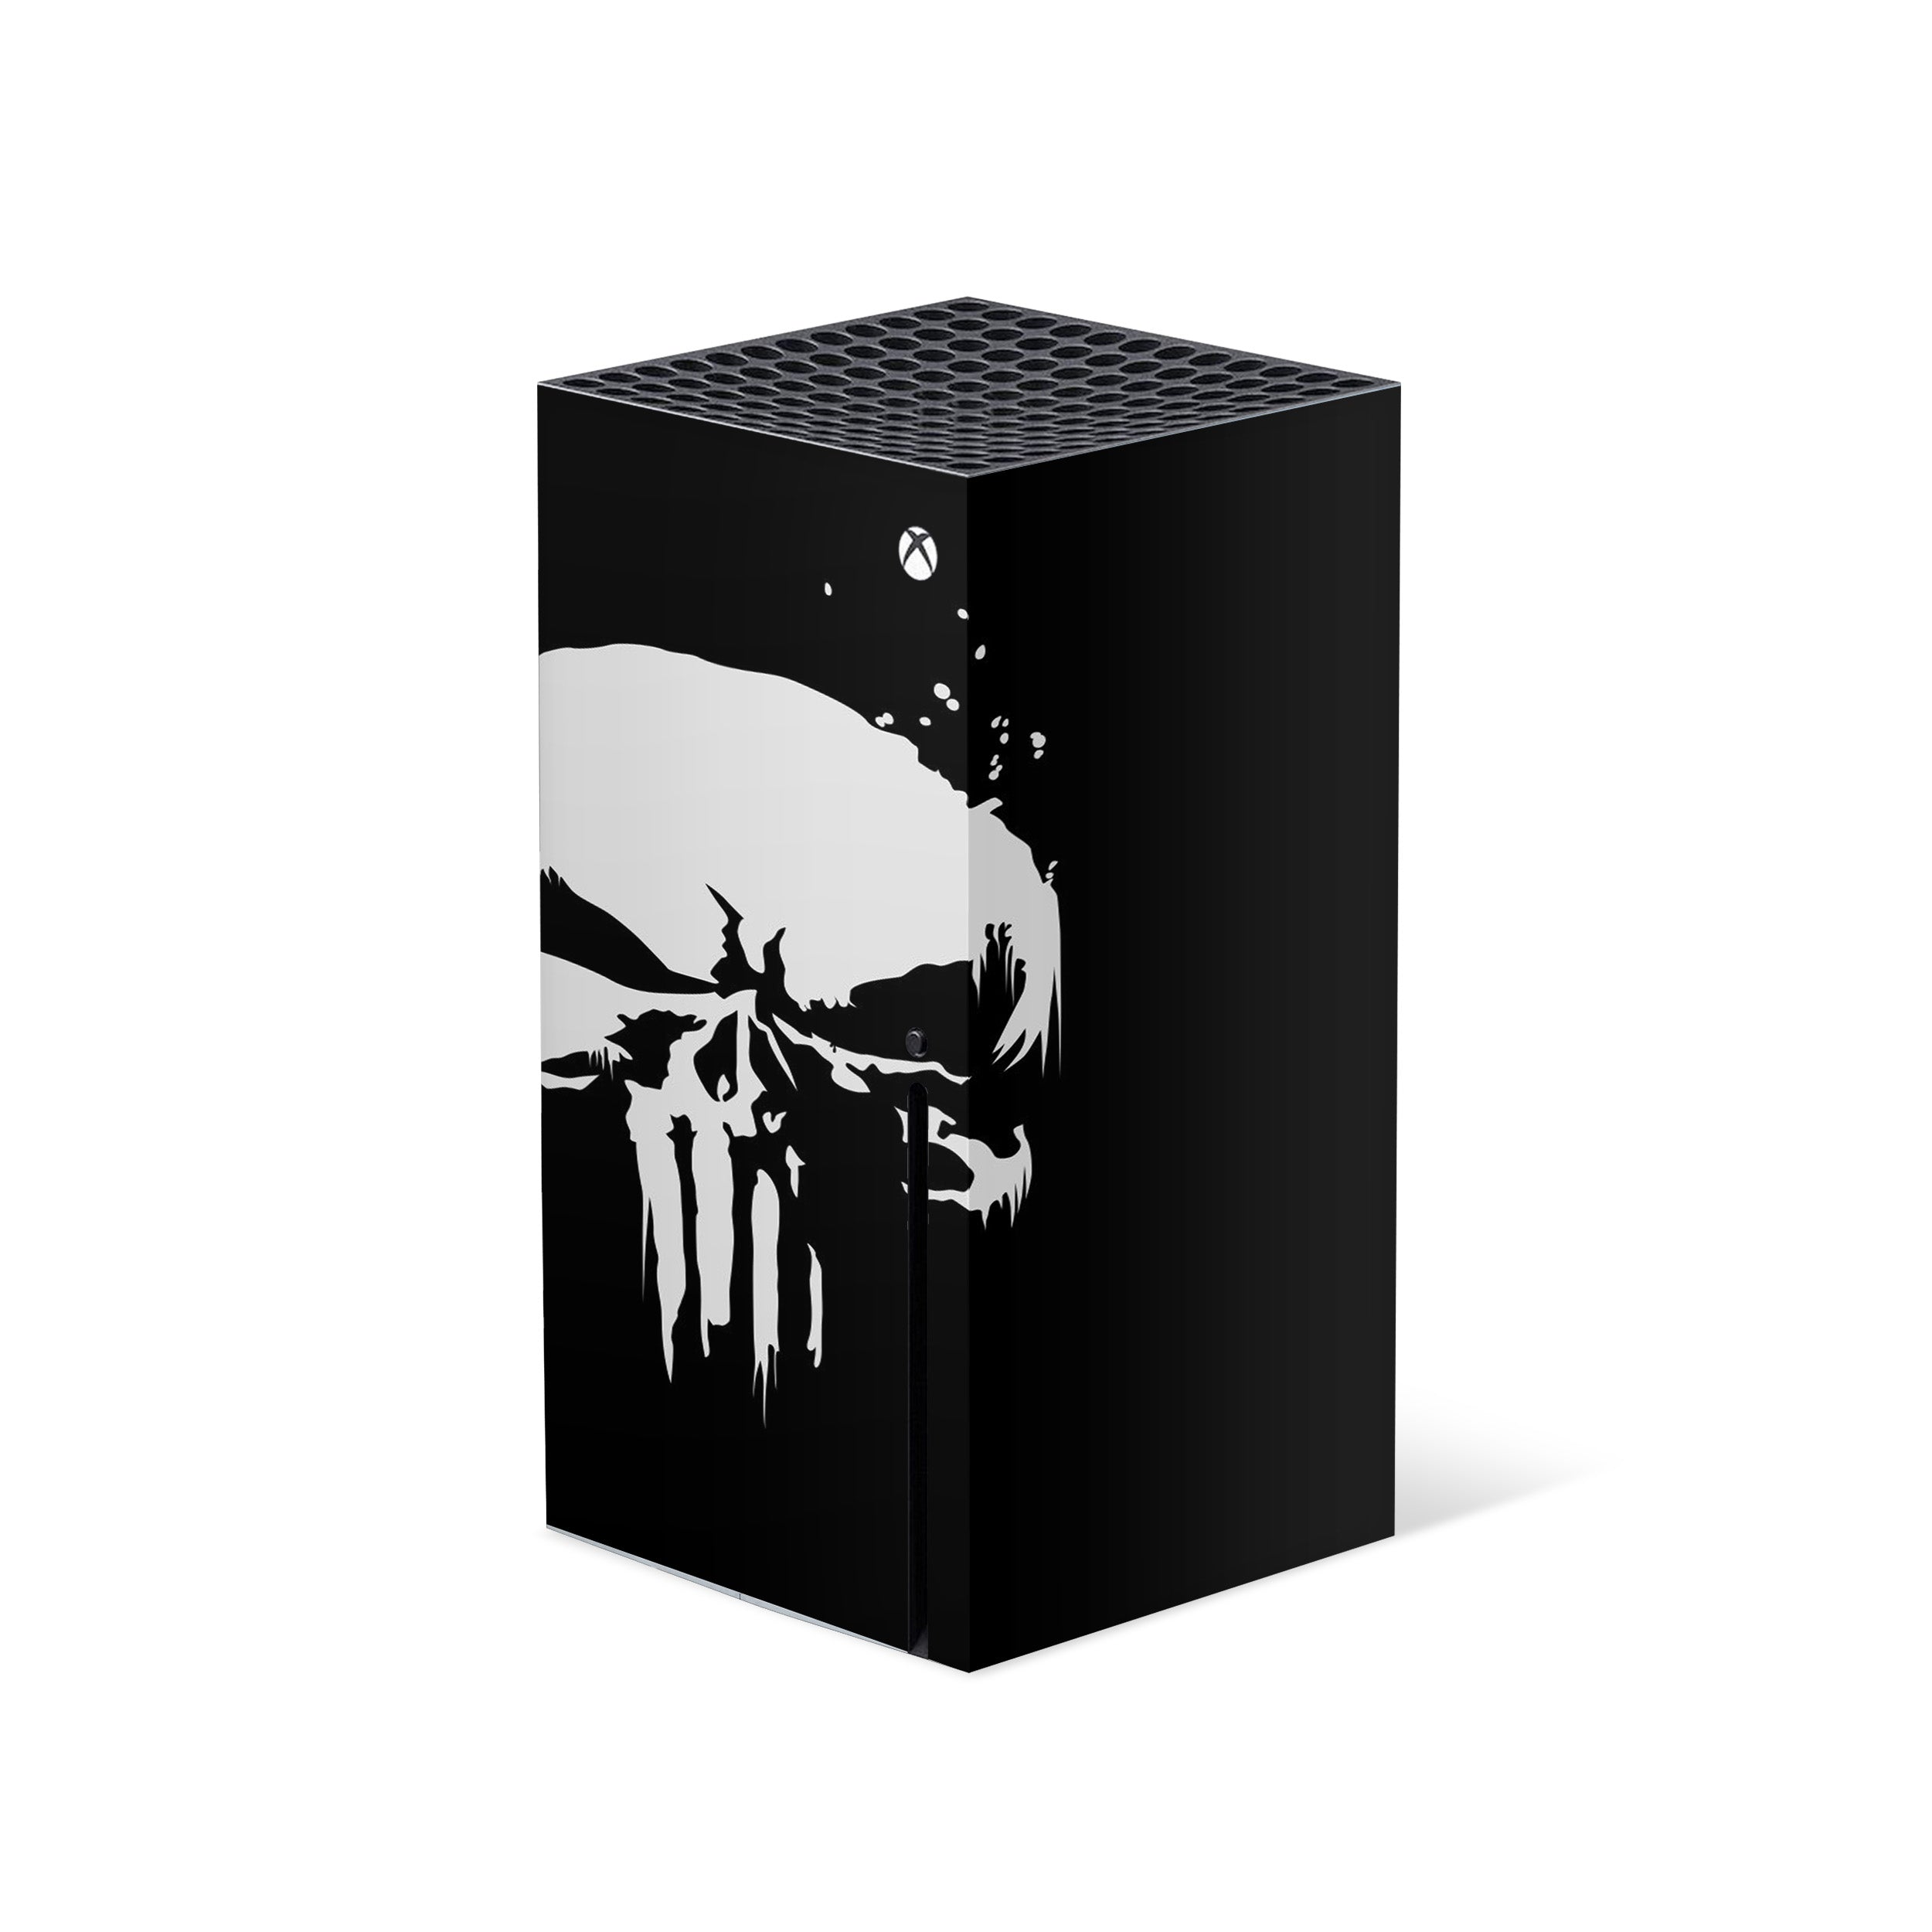 A video game skin featuring a Marvel The Punisher design for the Xbox Series X.